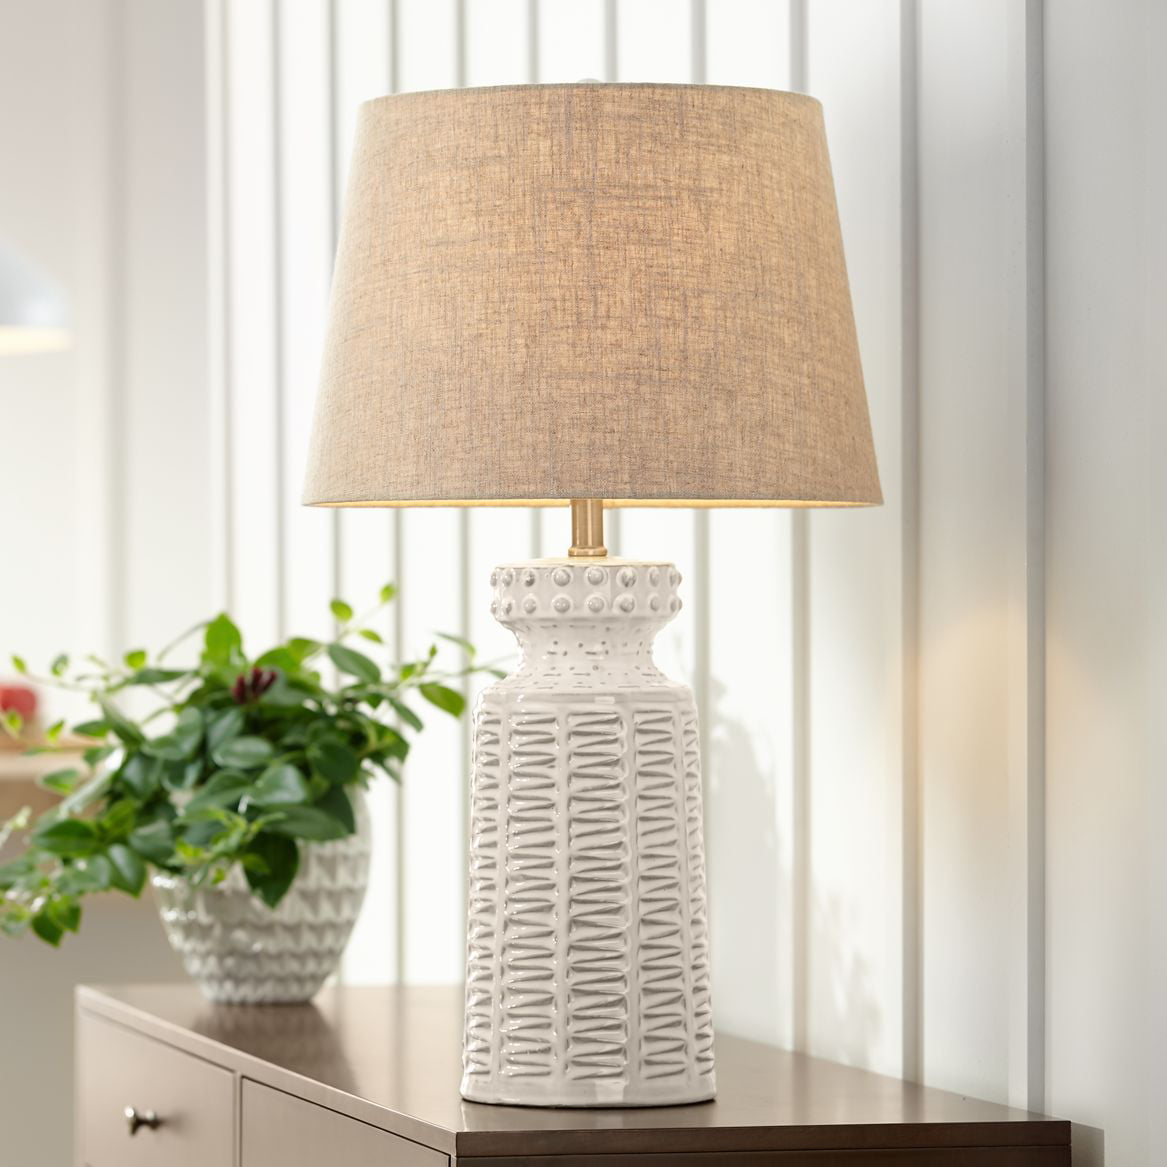 Country table lamps